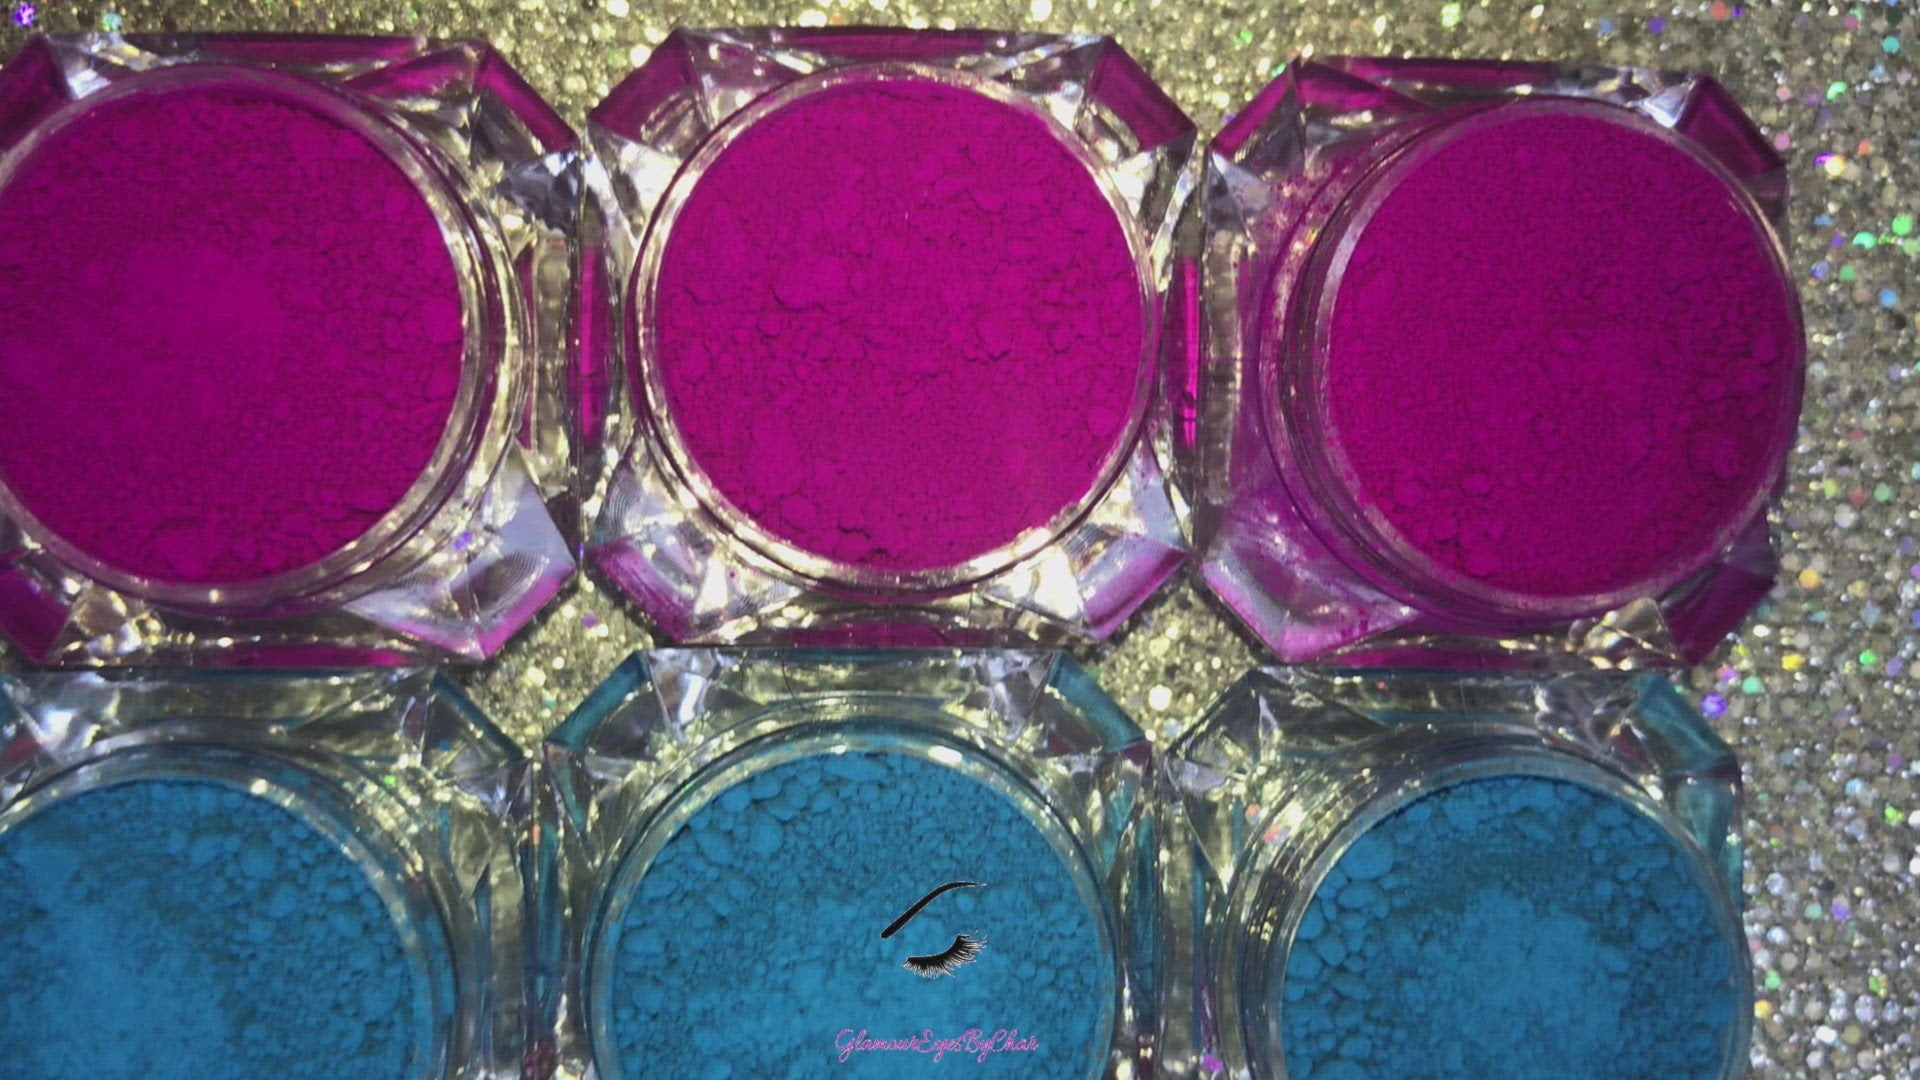 These neon pigments are﻿ cosmetic grade, HIGHLY PIGMENTED, and super gorgeous on the eyes and nails. Comes in 5g jars only. Tip: Apply some of our glitter on top of the pigment to really GLAMOUREYES your look.